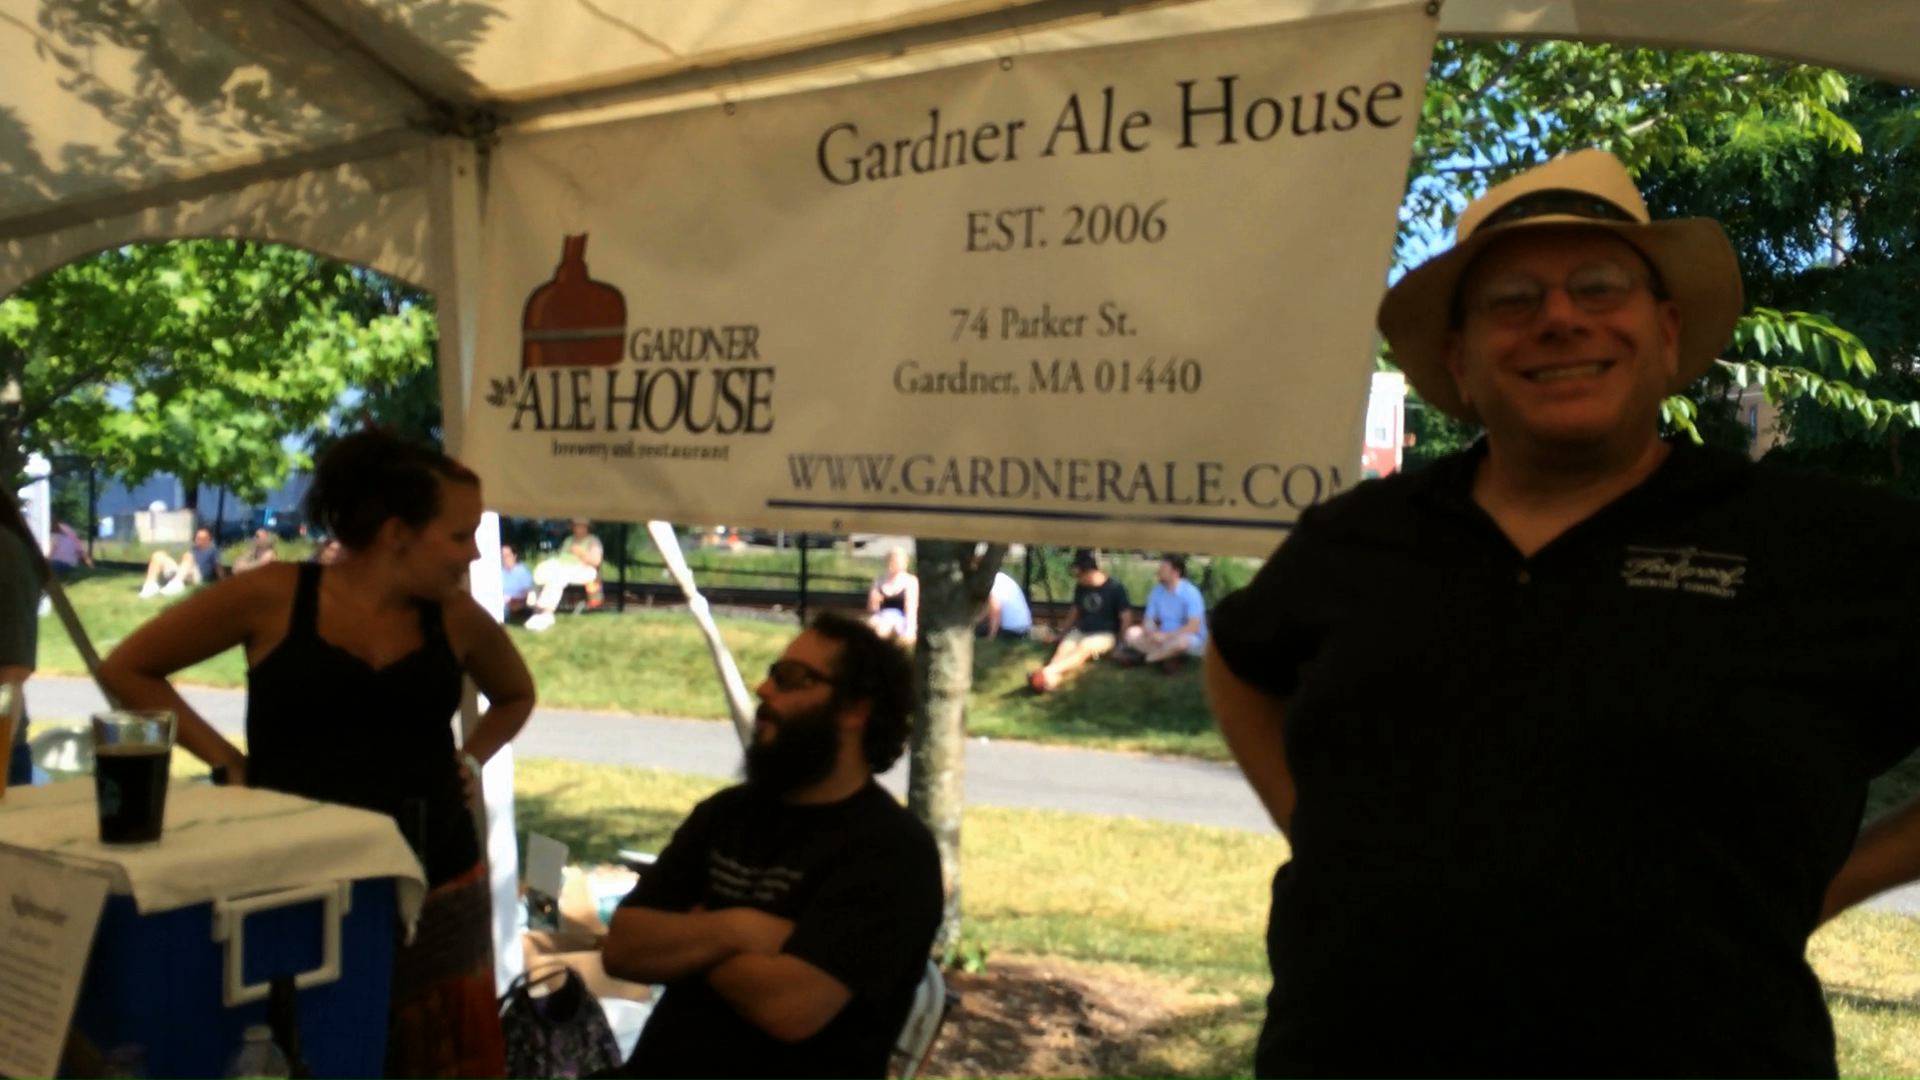 Gardner Ale House Head Brewer and other staff